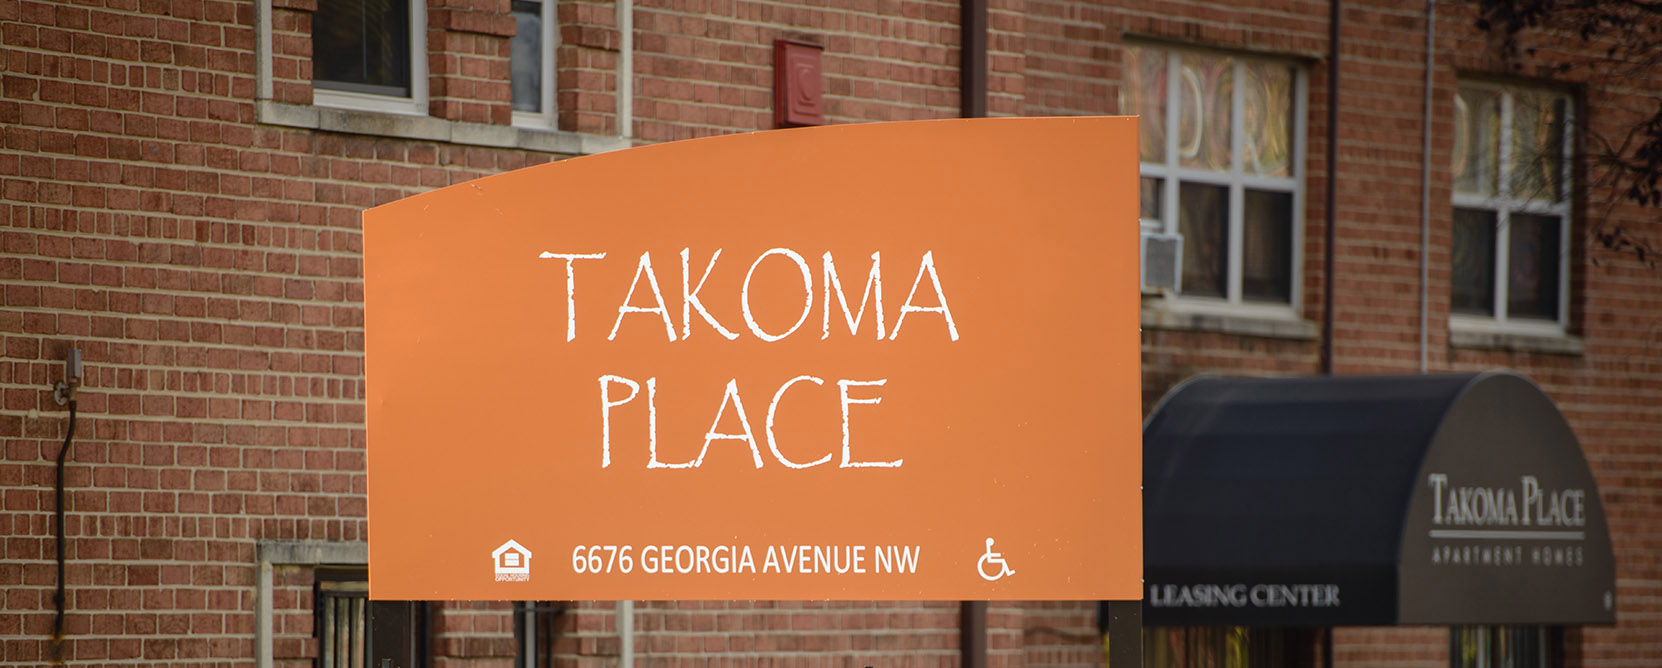 Exterior sign of the Takoma Place apartments